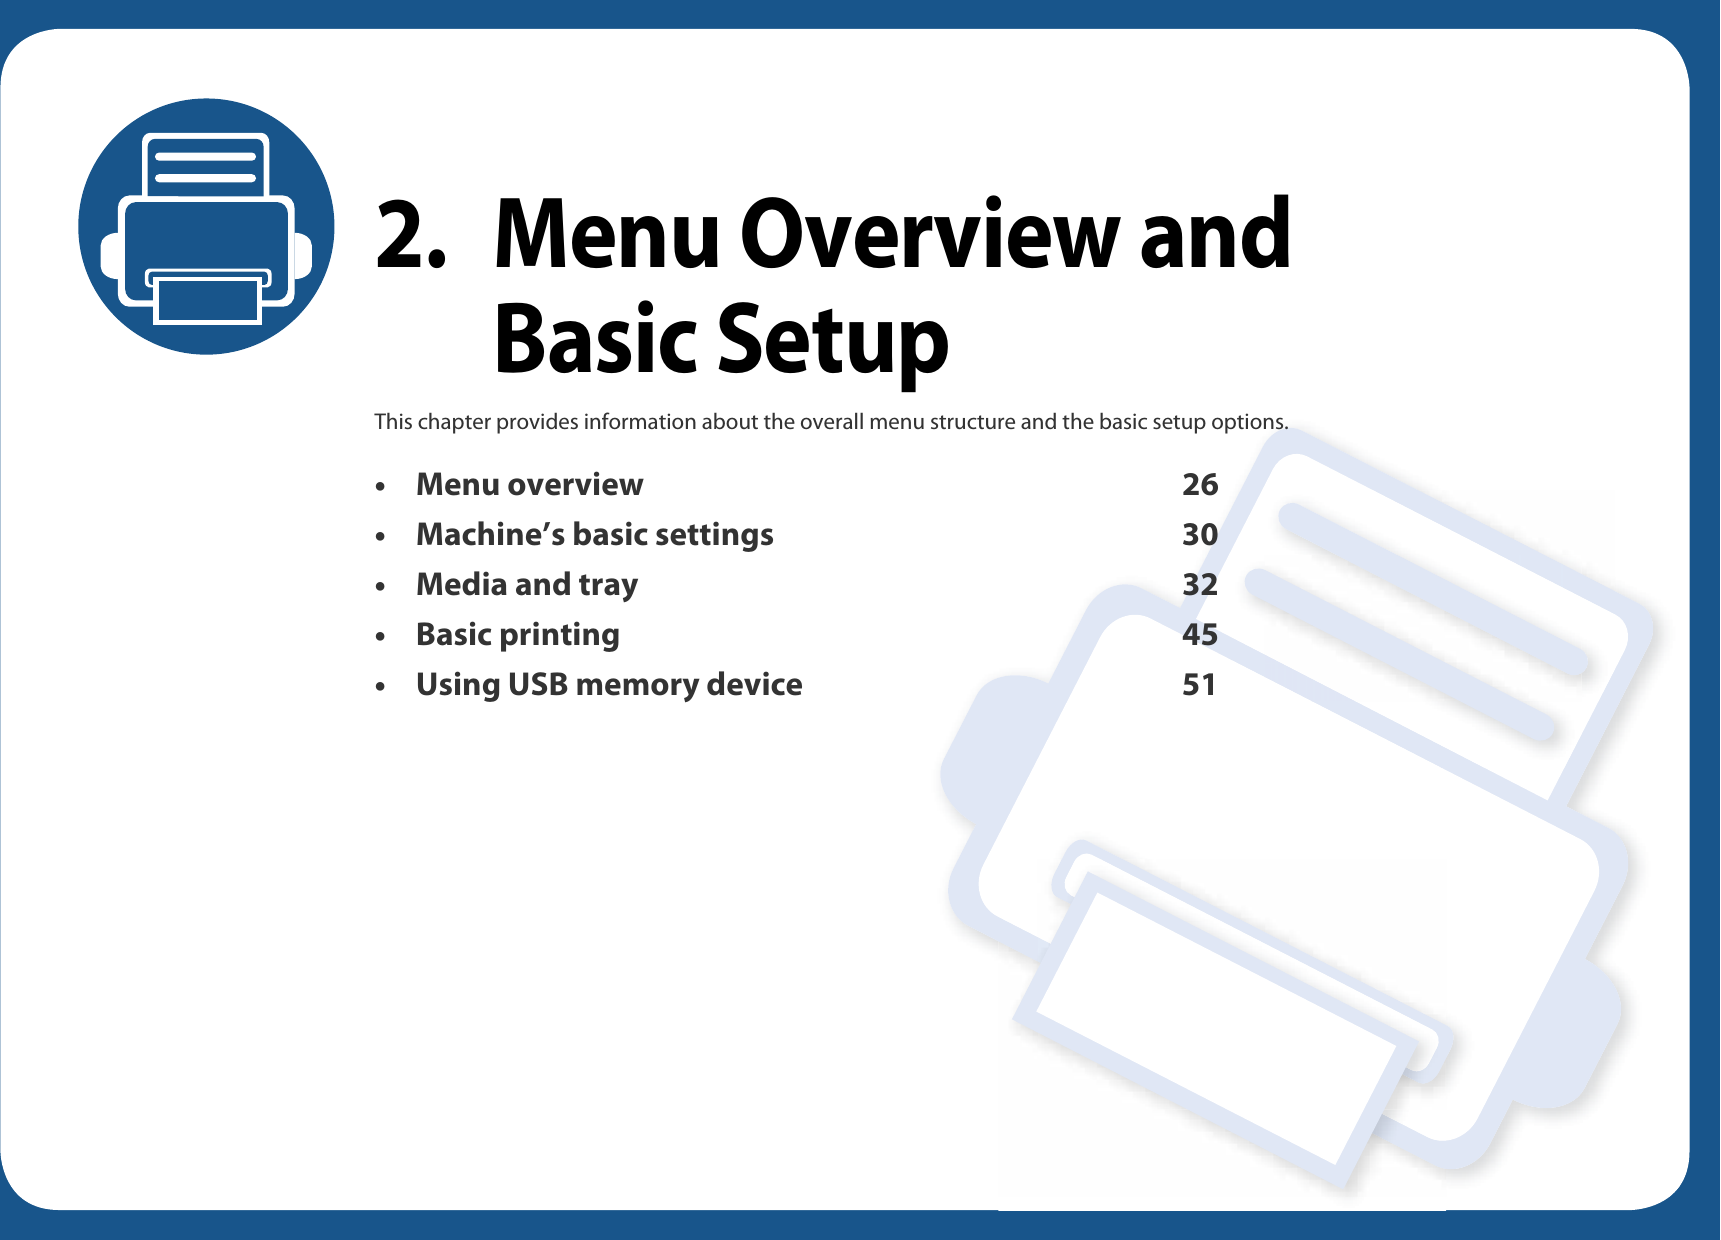 2. Menu Overview and Basic SetupThis chapter provides information about the overall menu structure and the basic setup options.• Menu overview 26• Machine’s basic settings 30• Media and tray 32• Basic printing 45• Using USB memory device 51